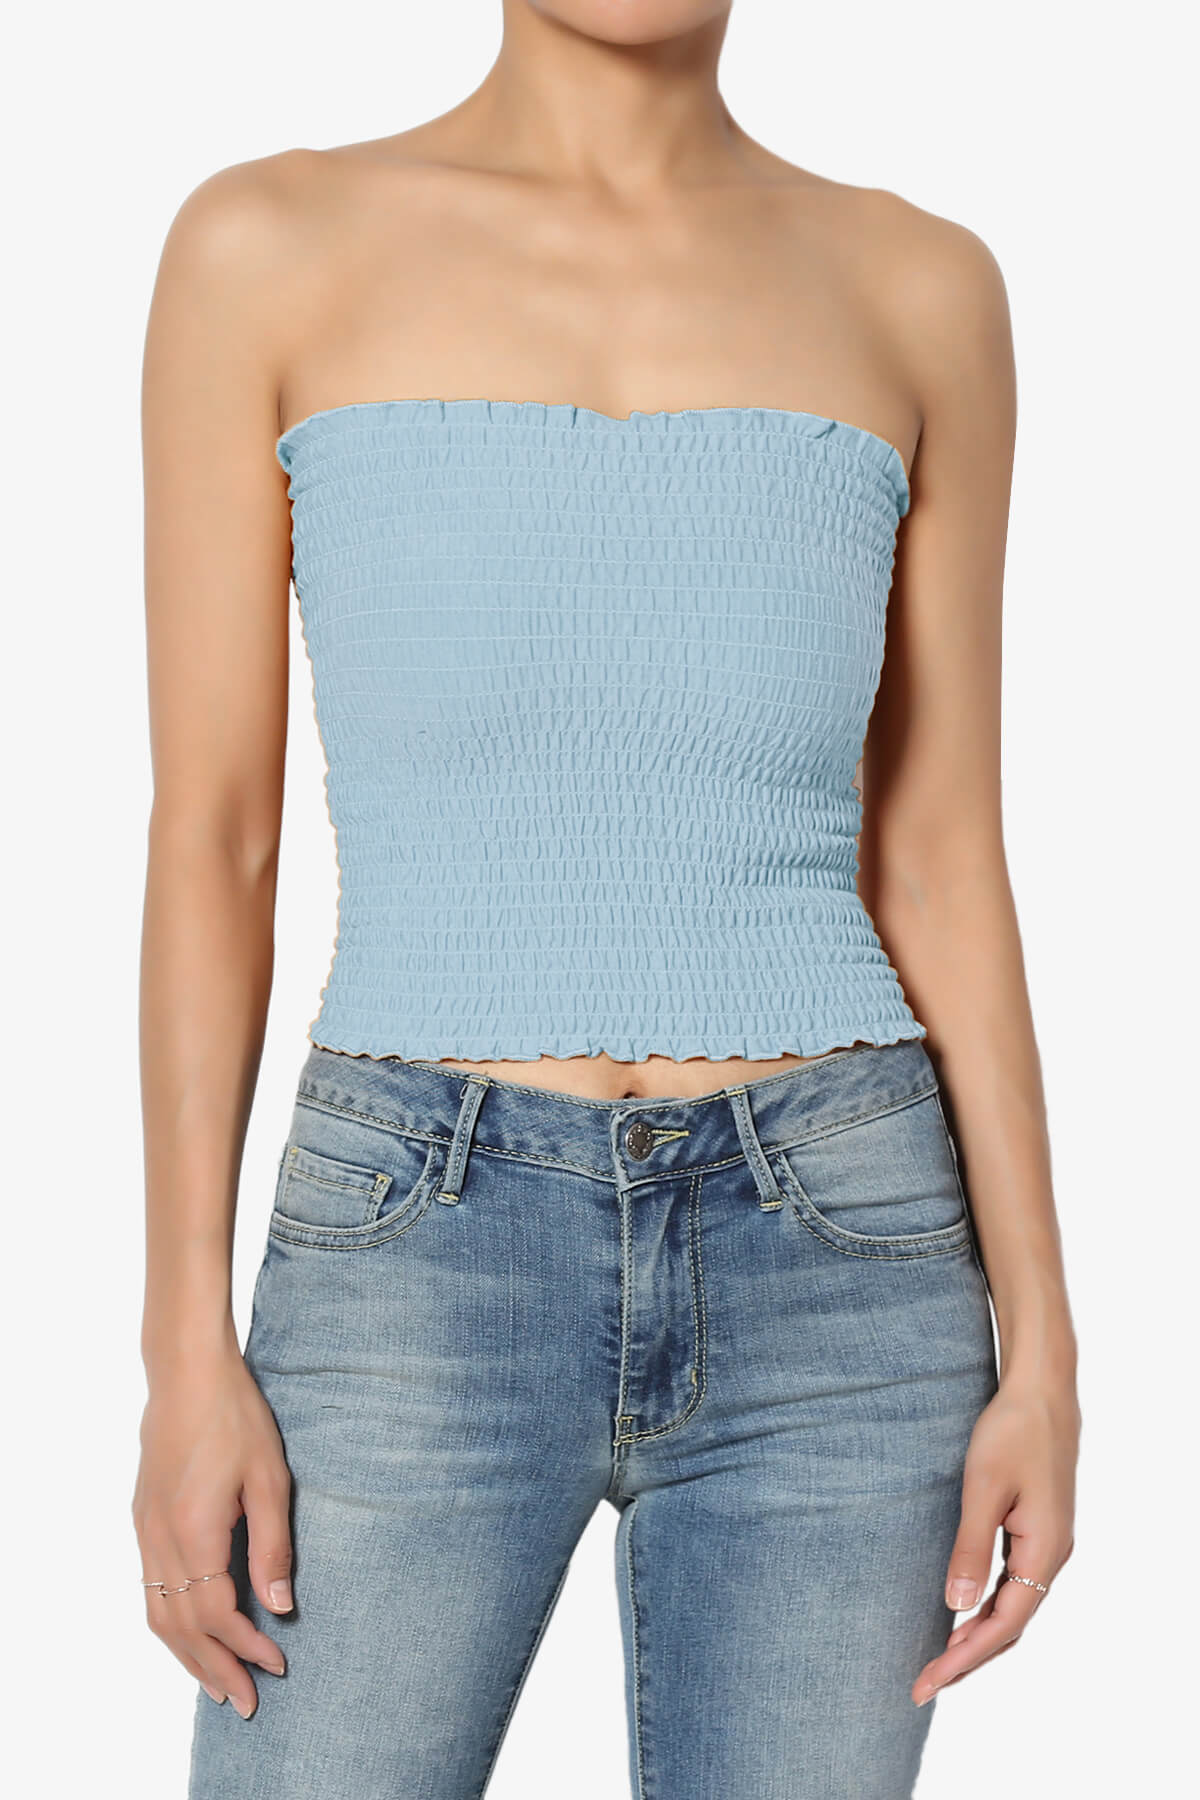 JUMP tube TOP camisole BLUE BOUCLE strapless BUILT IN BRA retail